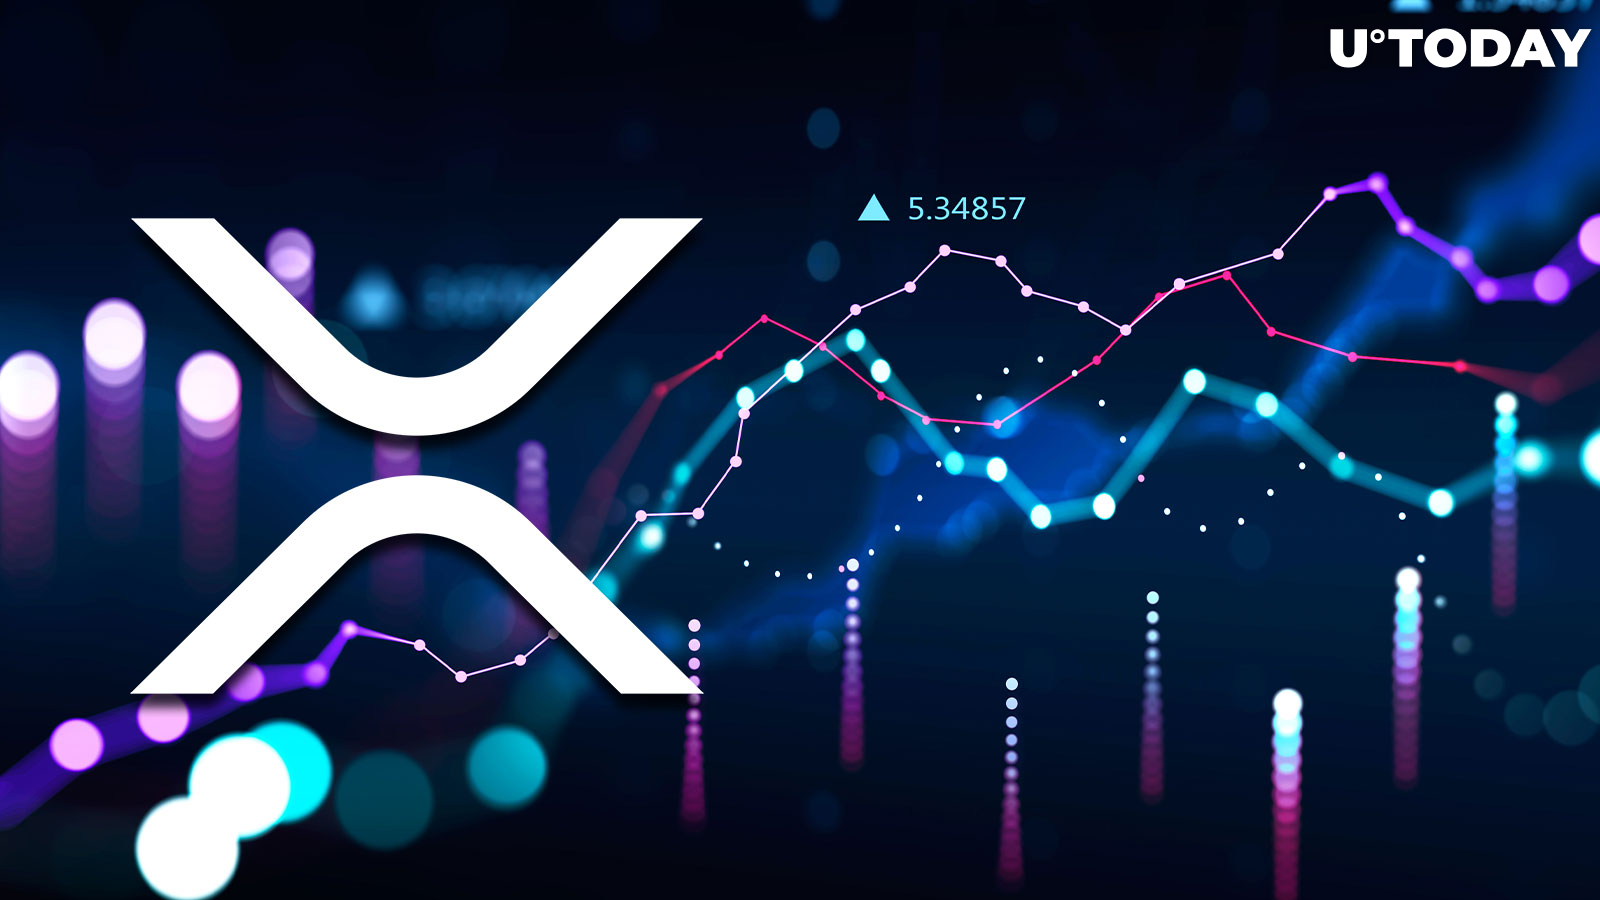 XRP Price up 12.3% from Monday as Major News Expected